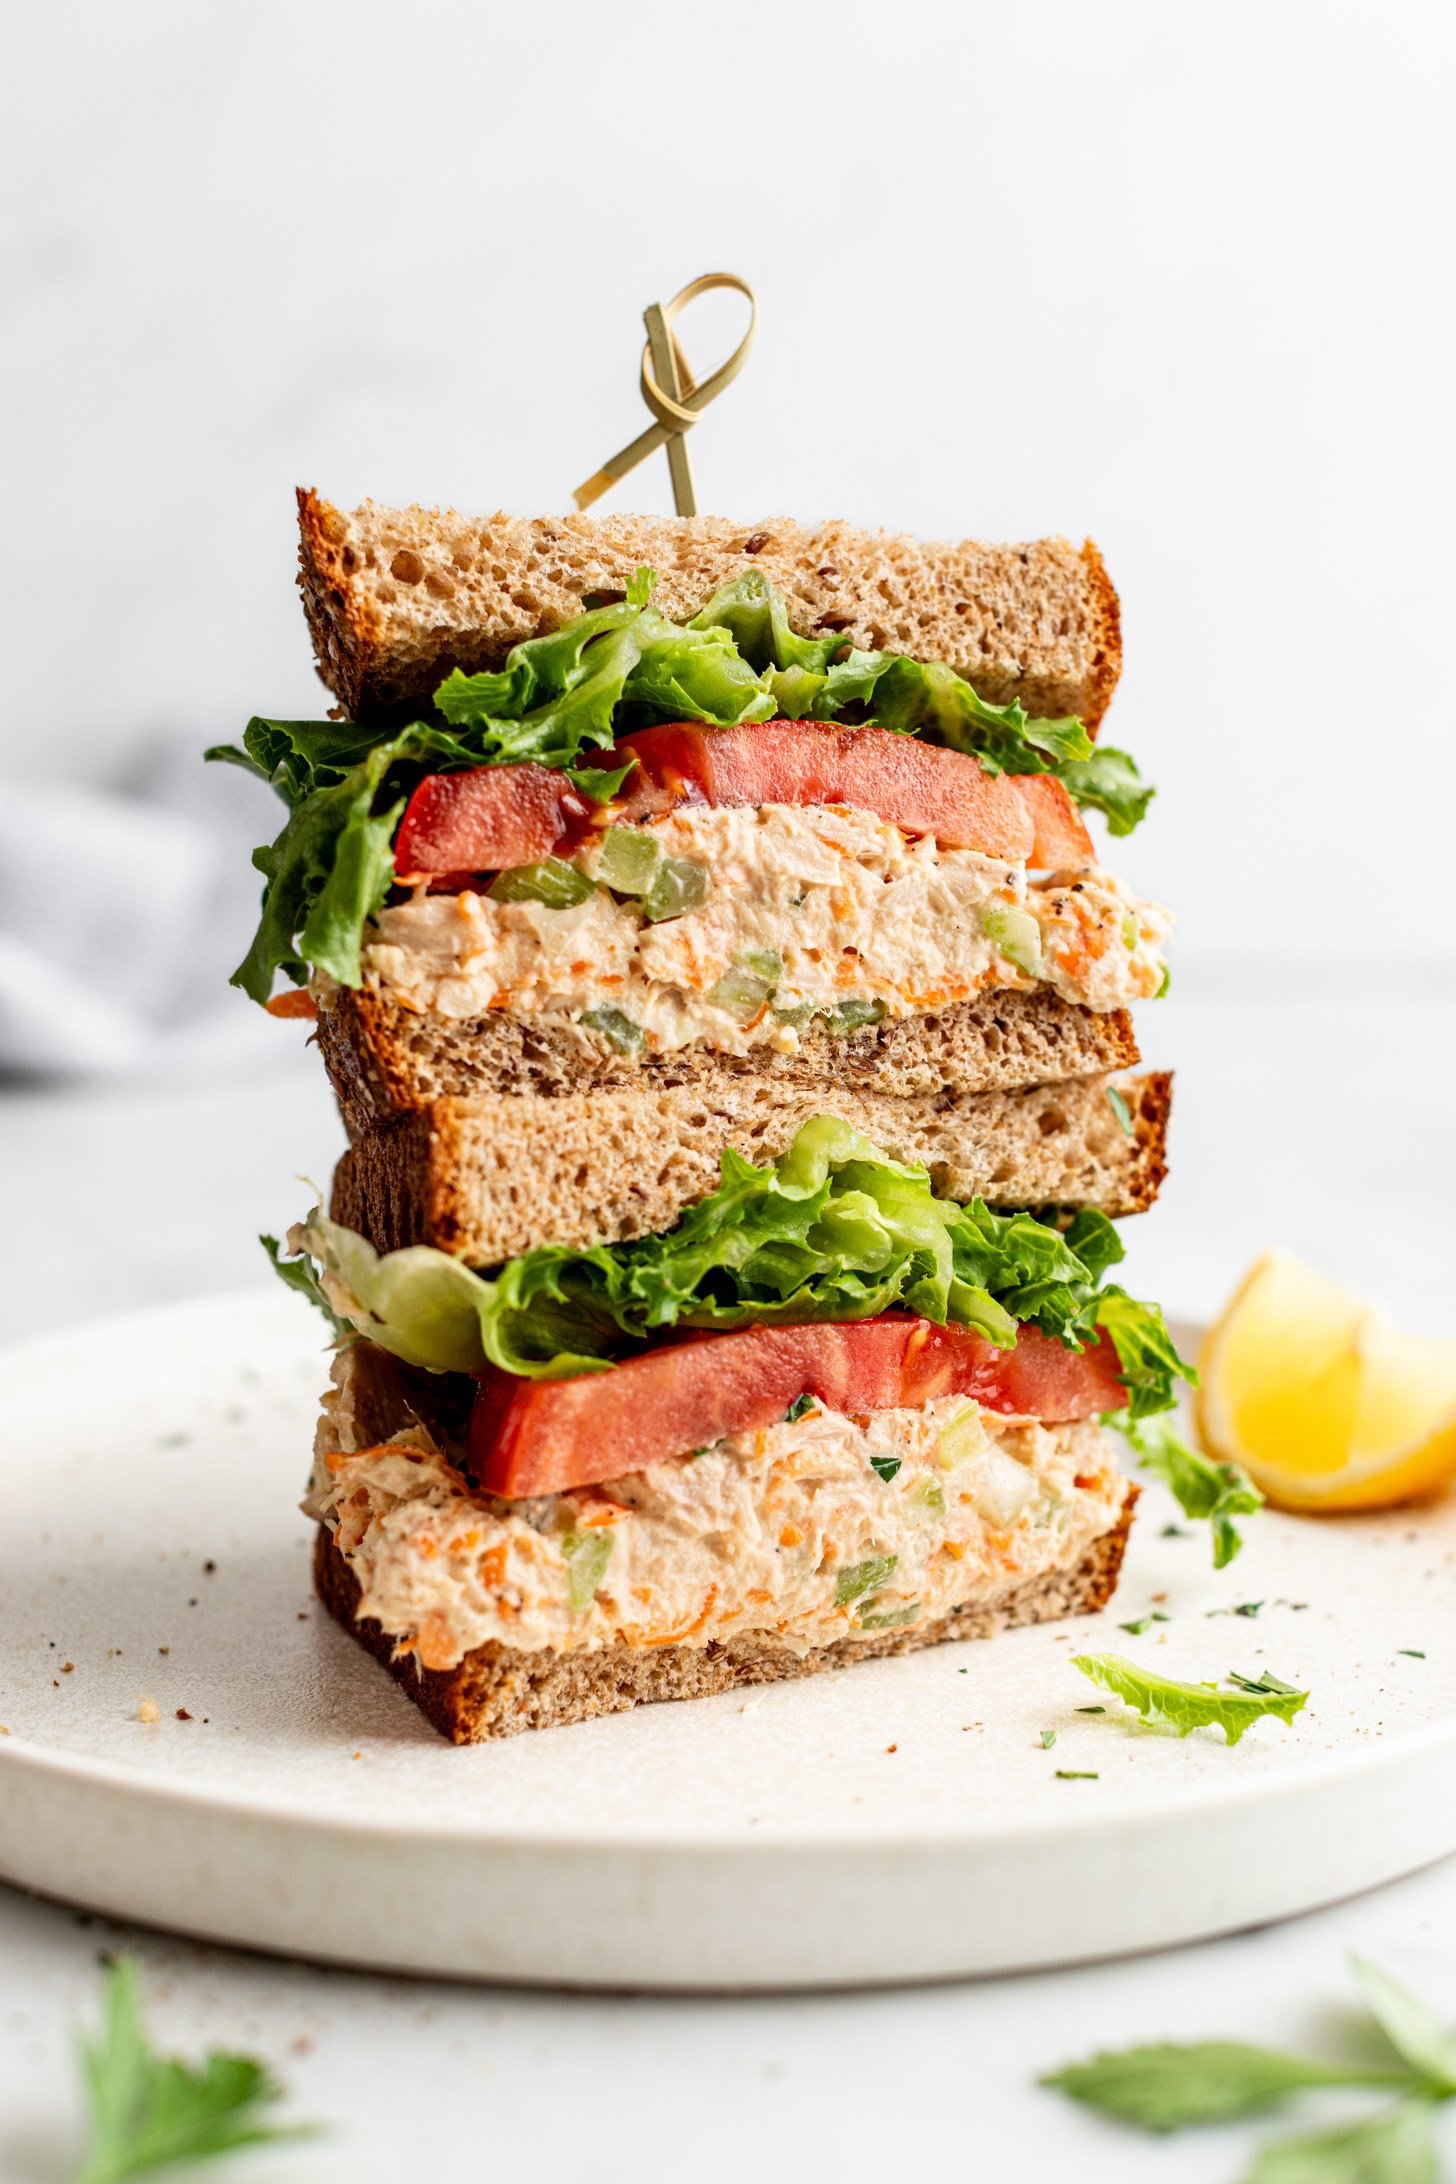 Tuna salad sandwich on wheat bread with lettuce and tomato, cut in half and the halves are stacked on top of one another. There is a wedge of lemon on the plate with the sandwich 